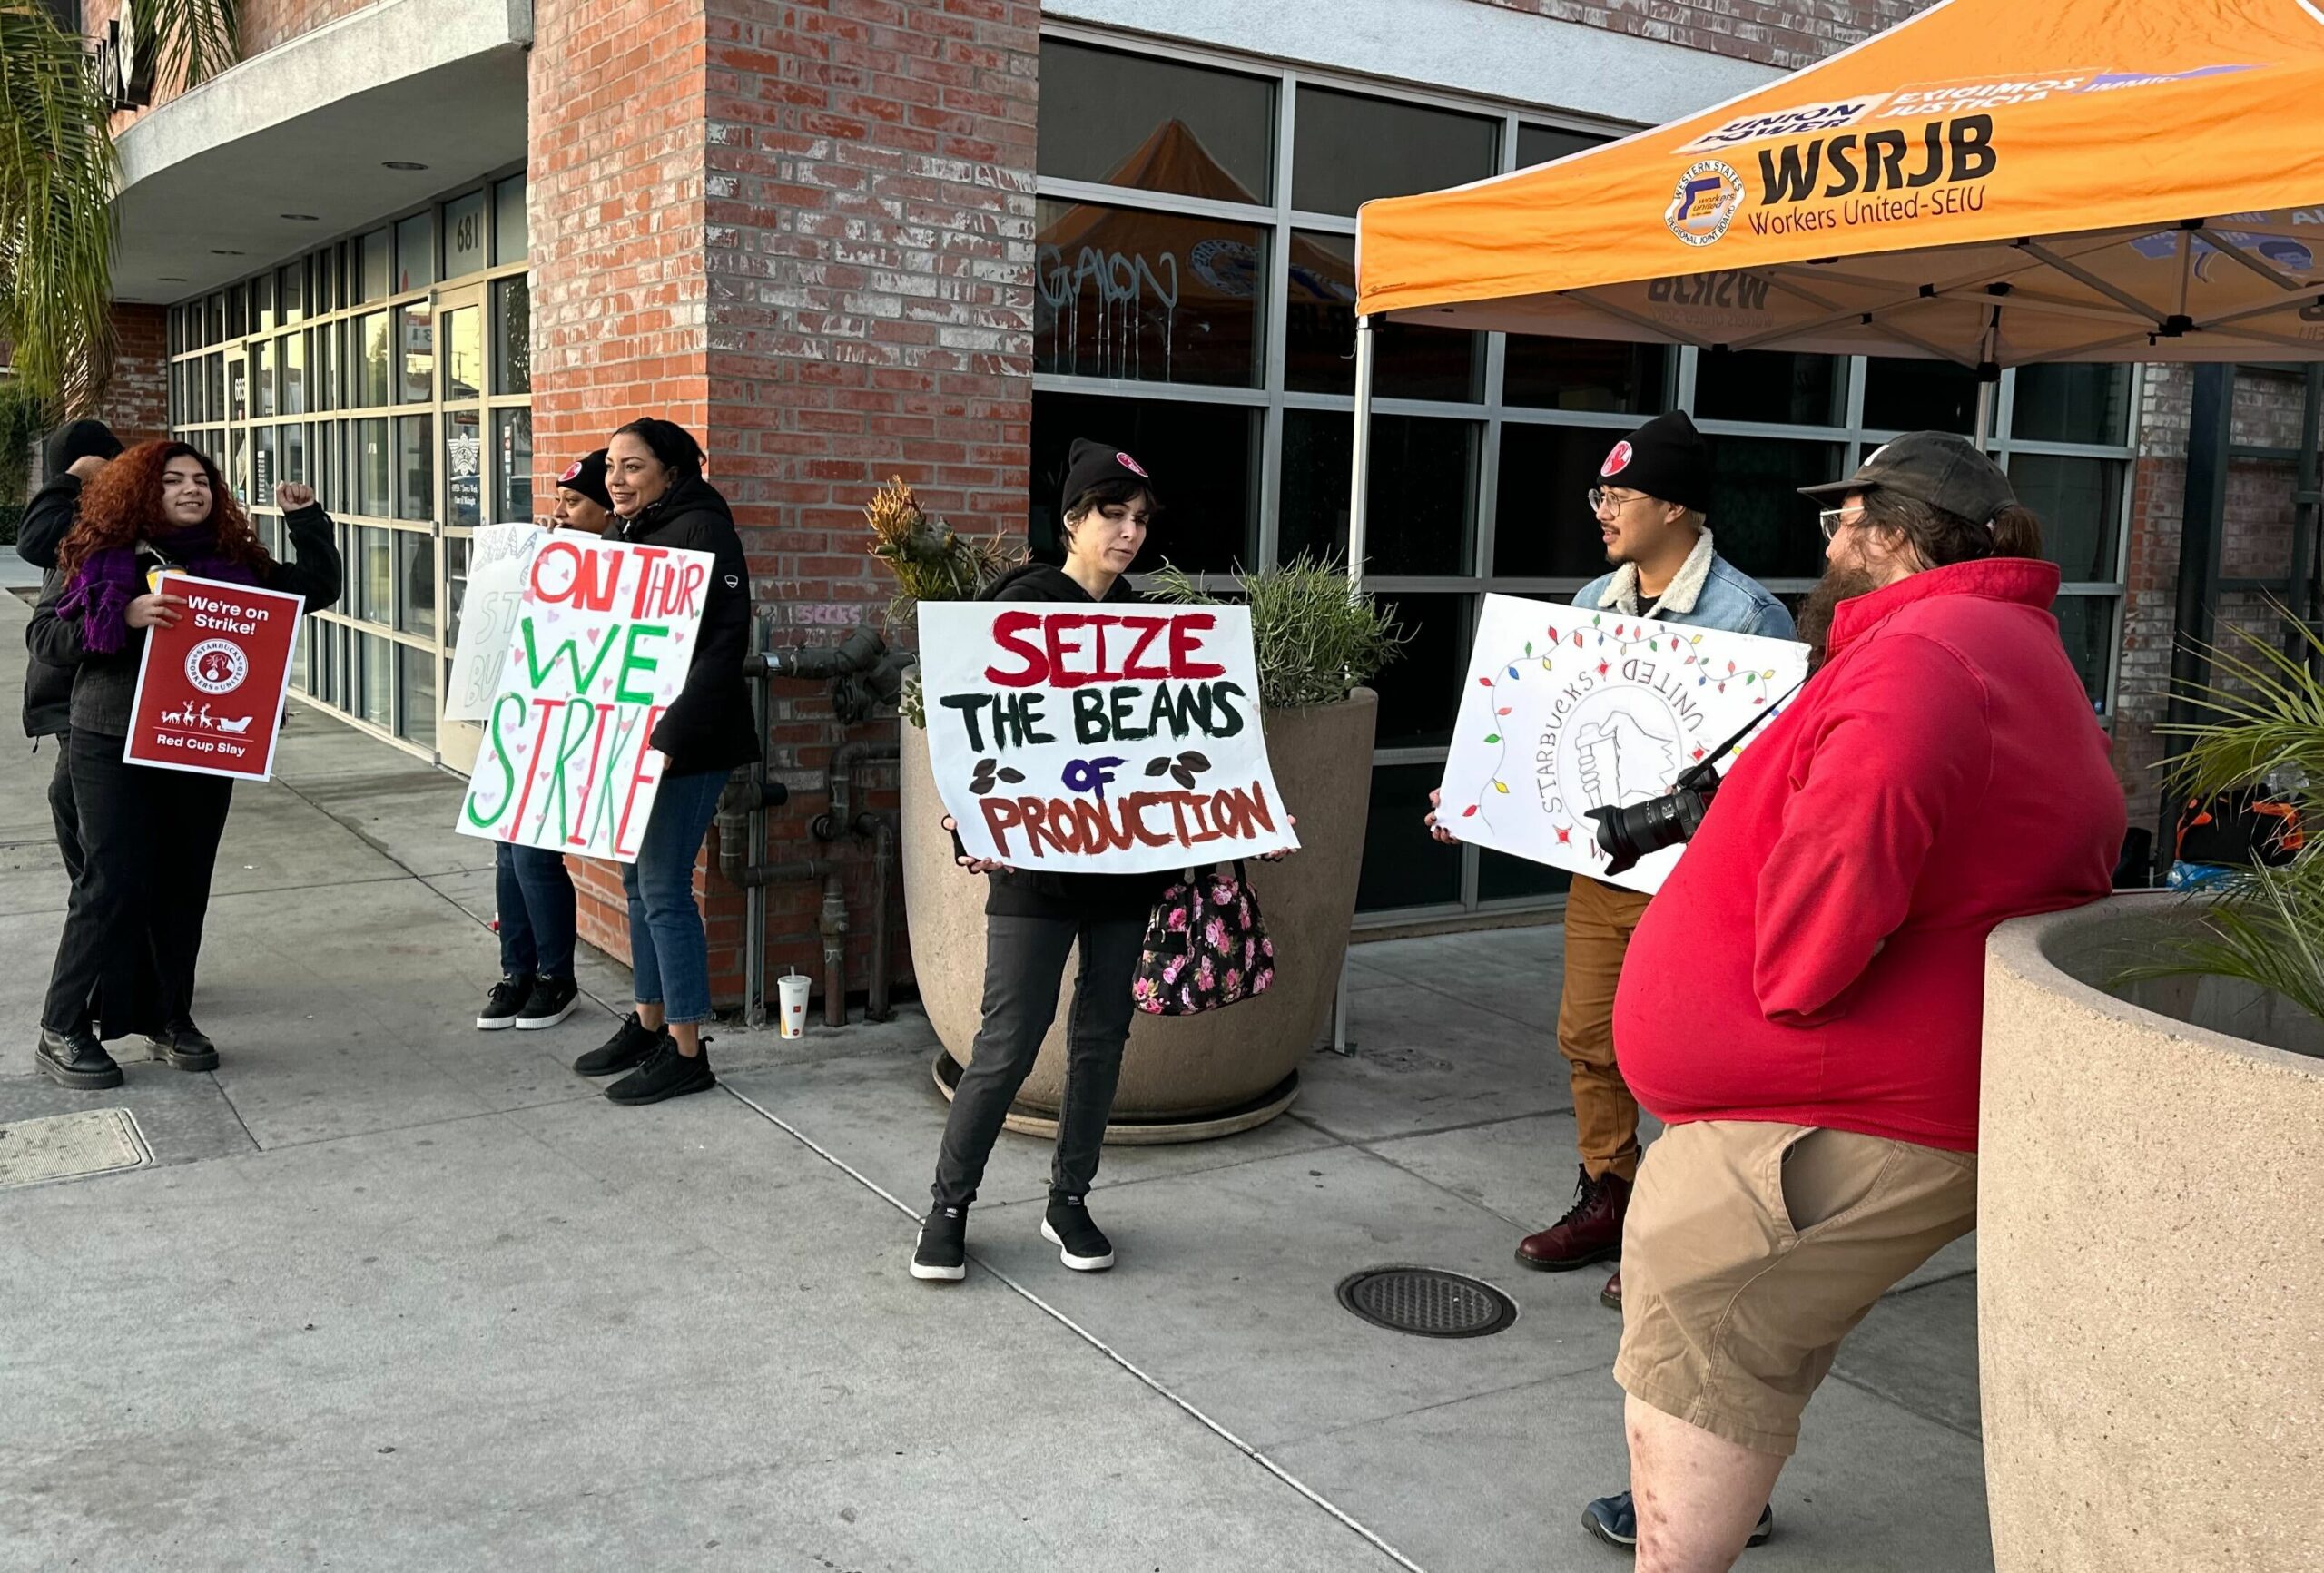 Workers hold signs that read, “Starbucks Workers United,” “ON THUR[S] WE STRIKE,” and “SEIZE THE BEANS OF PRODUCTION,” with drawings of Christmas lights and coffee beans.